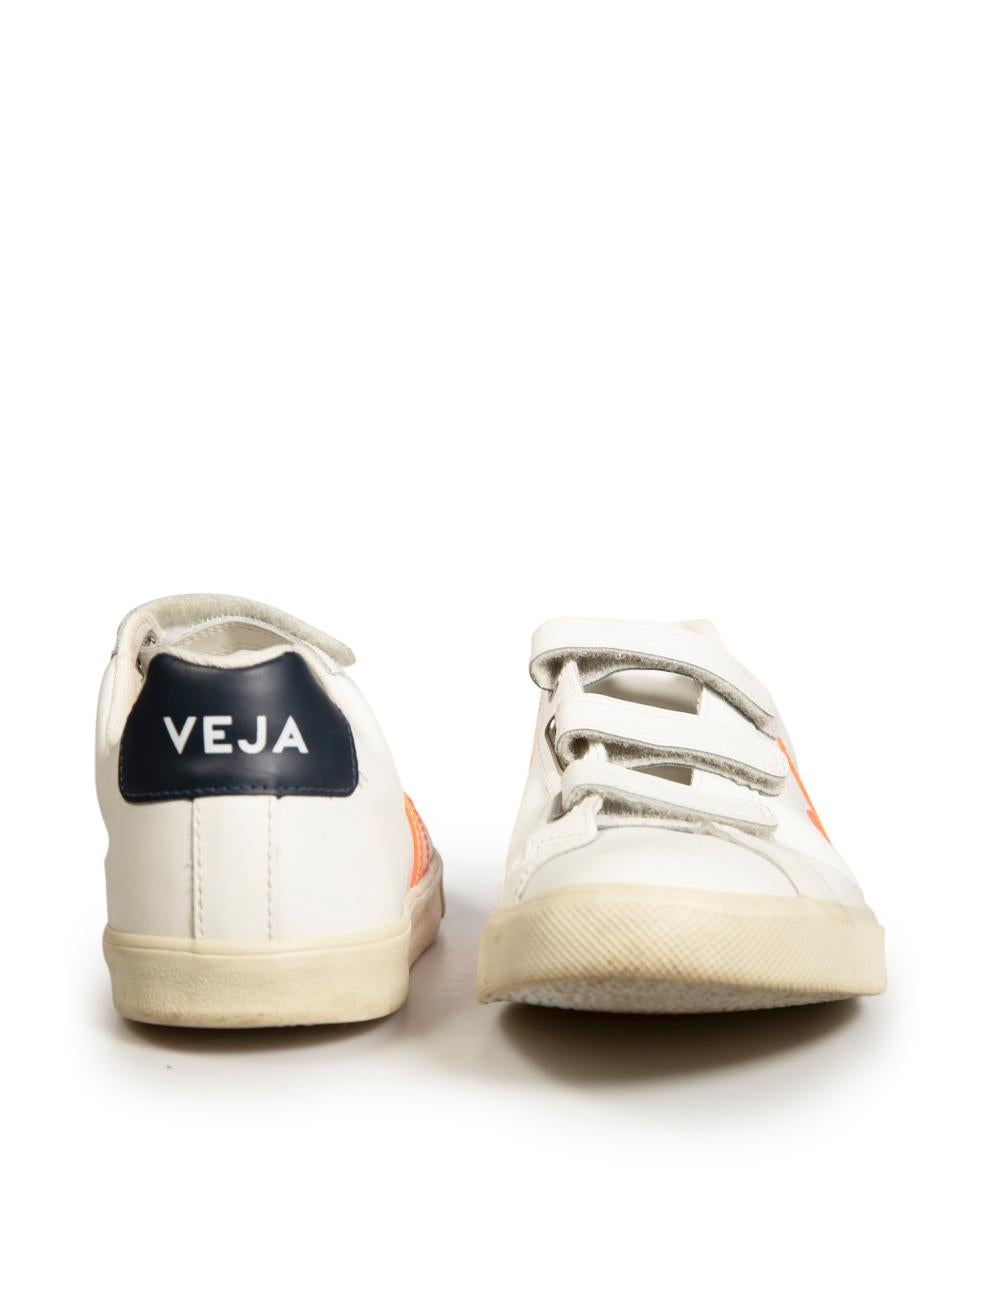 Veja White Leather Esplar V Trainers Size EU 40 In Good Condition For Sale In London, GB